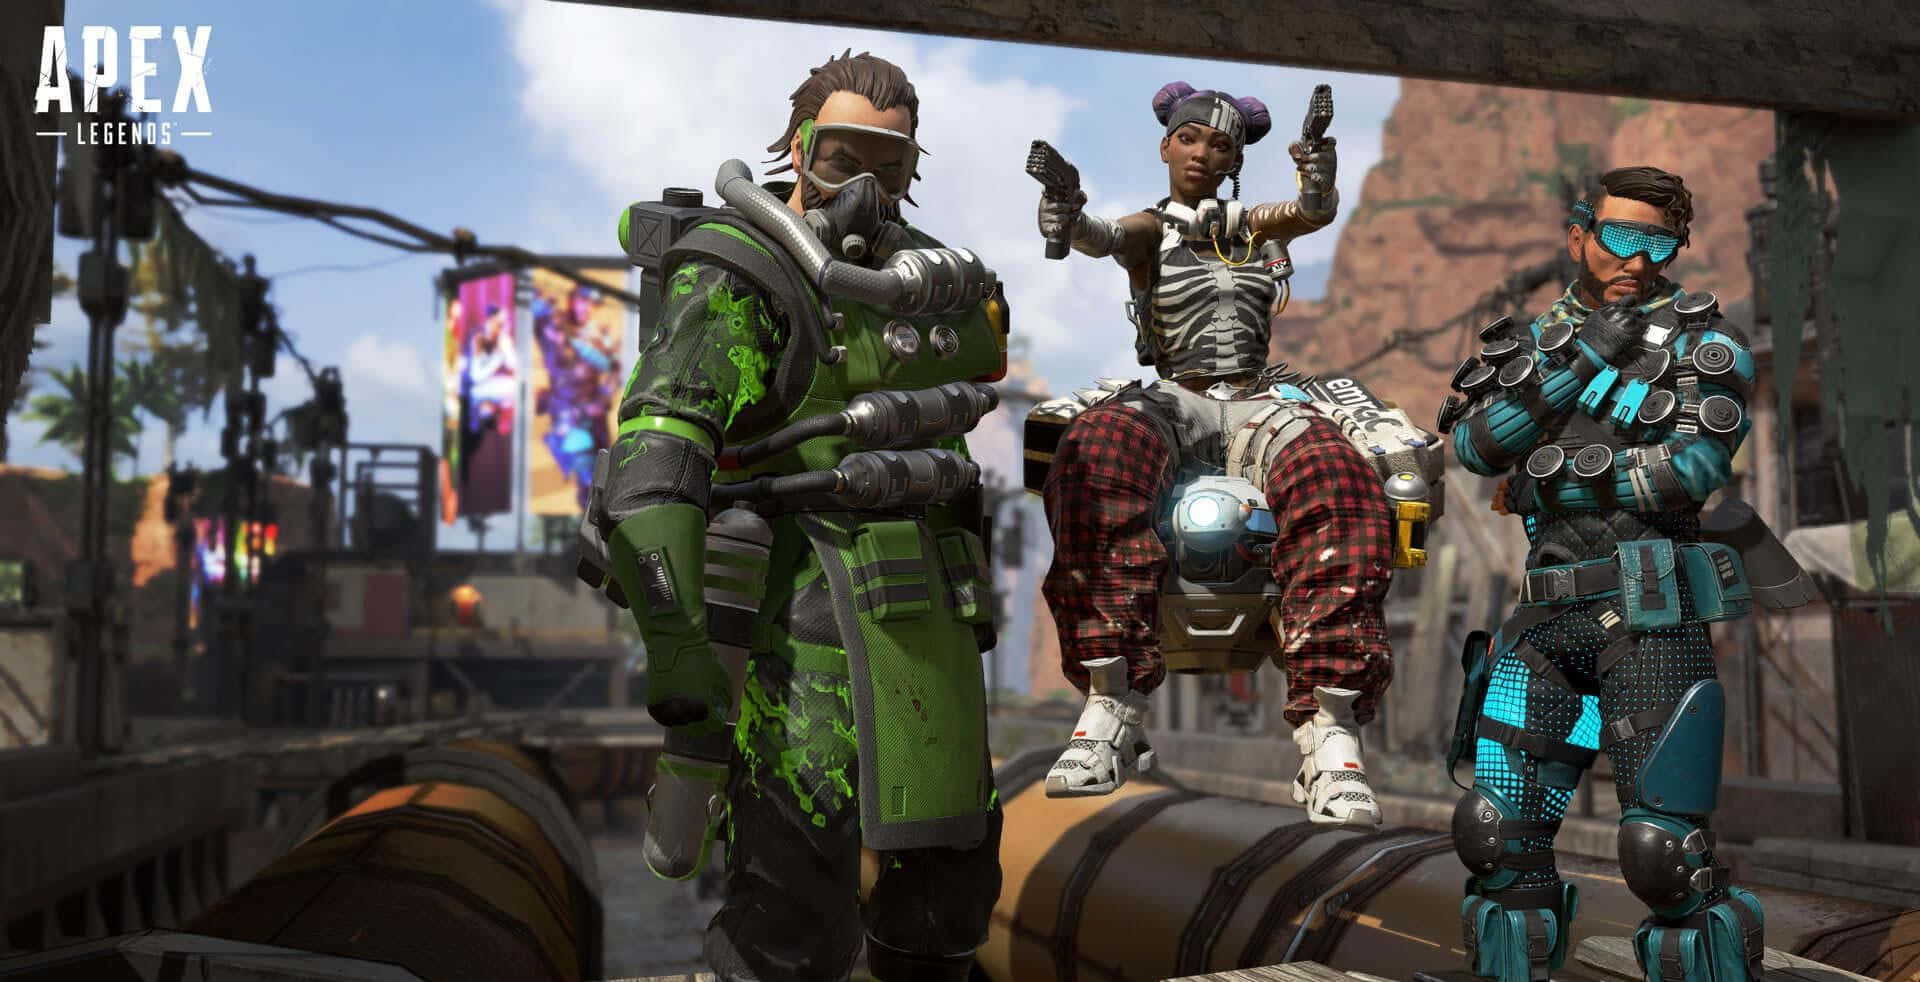 Apex Legends' Character, Caustic In Action Wallpaper